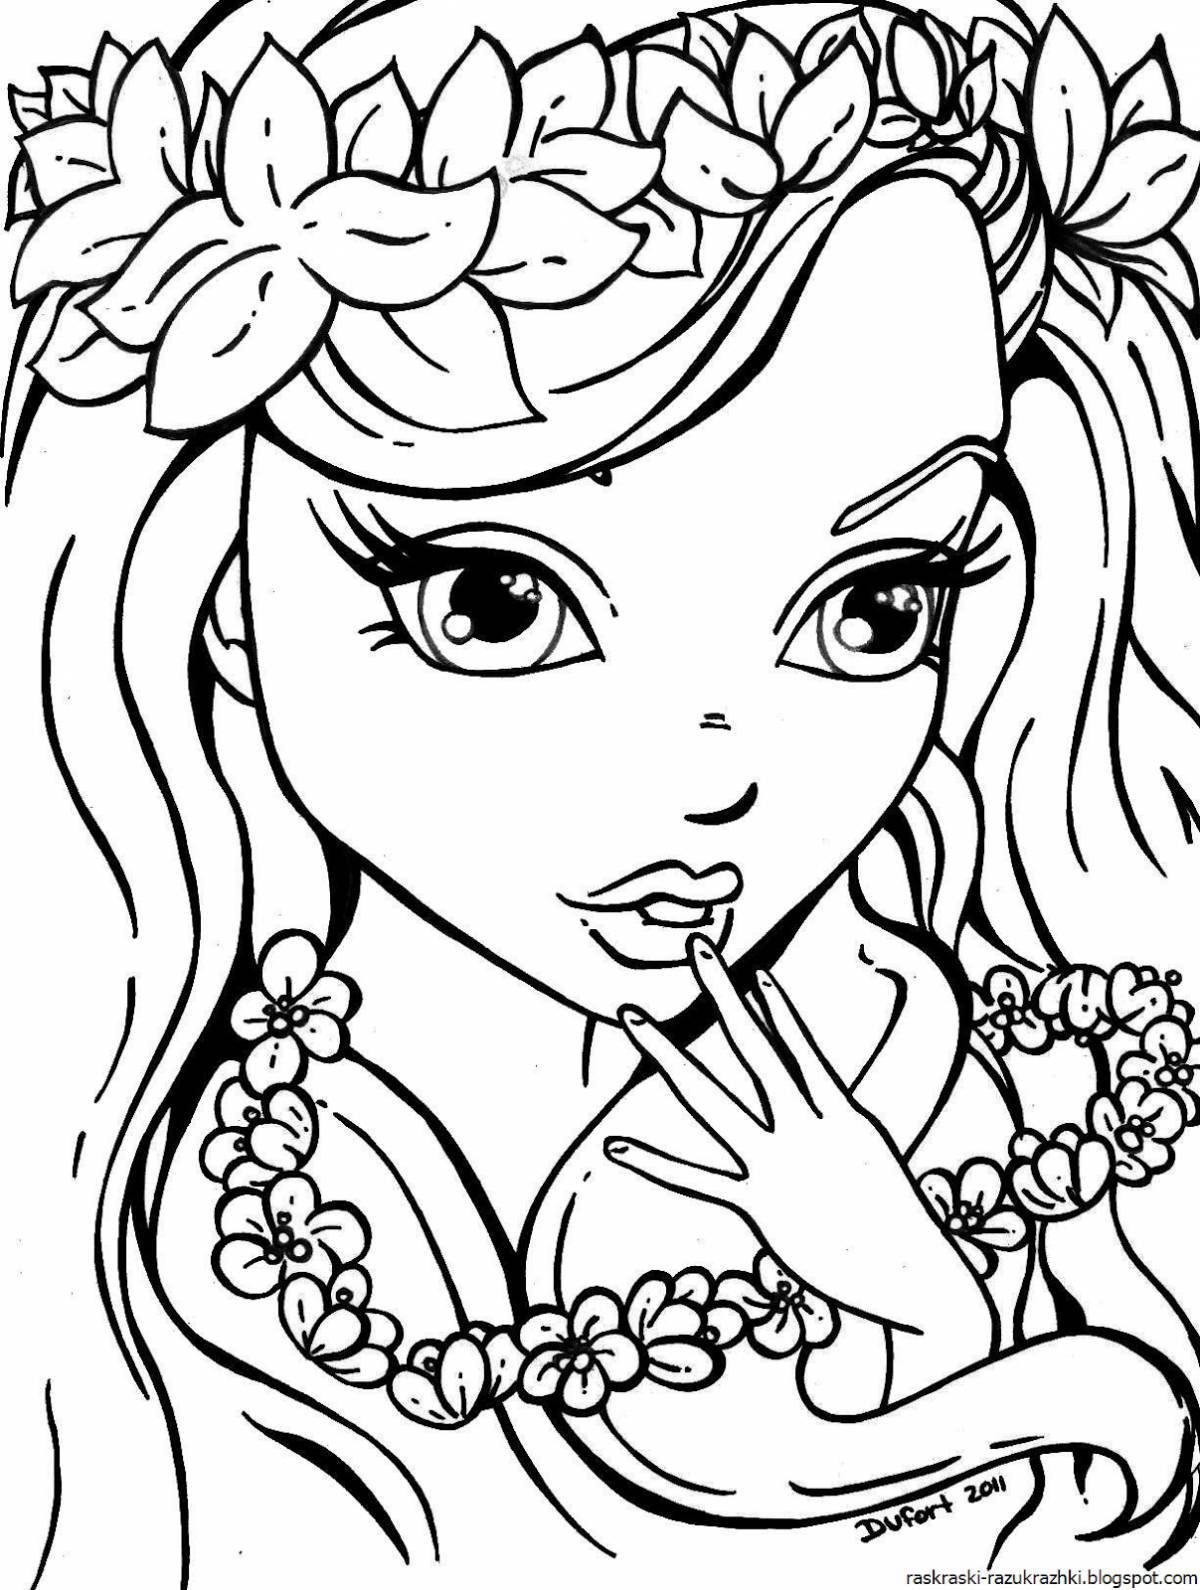 Creative coloring book for girls 9 years old